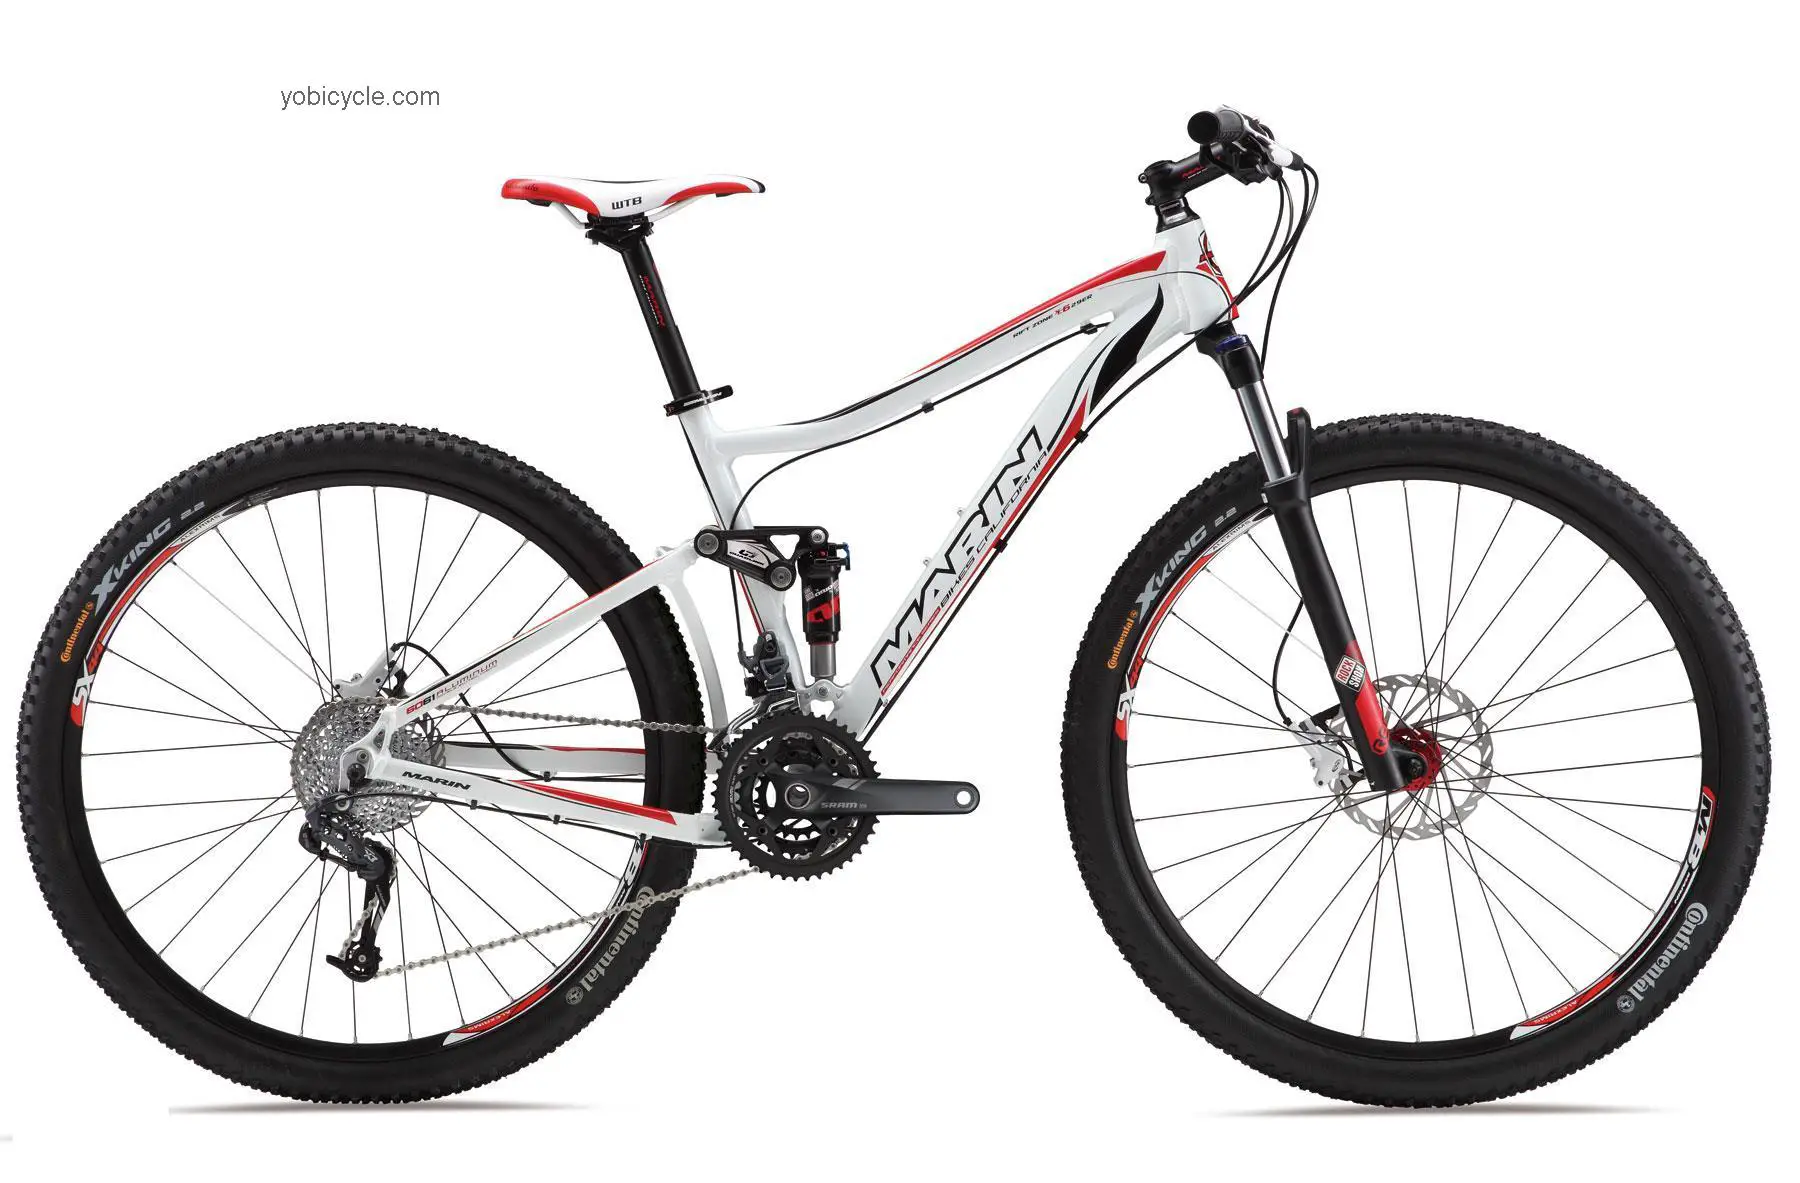 Marin Rift Zone 29er XC6 2012 comparison online with competitors